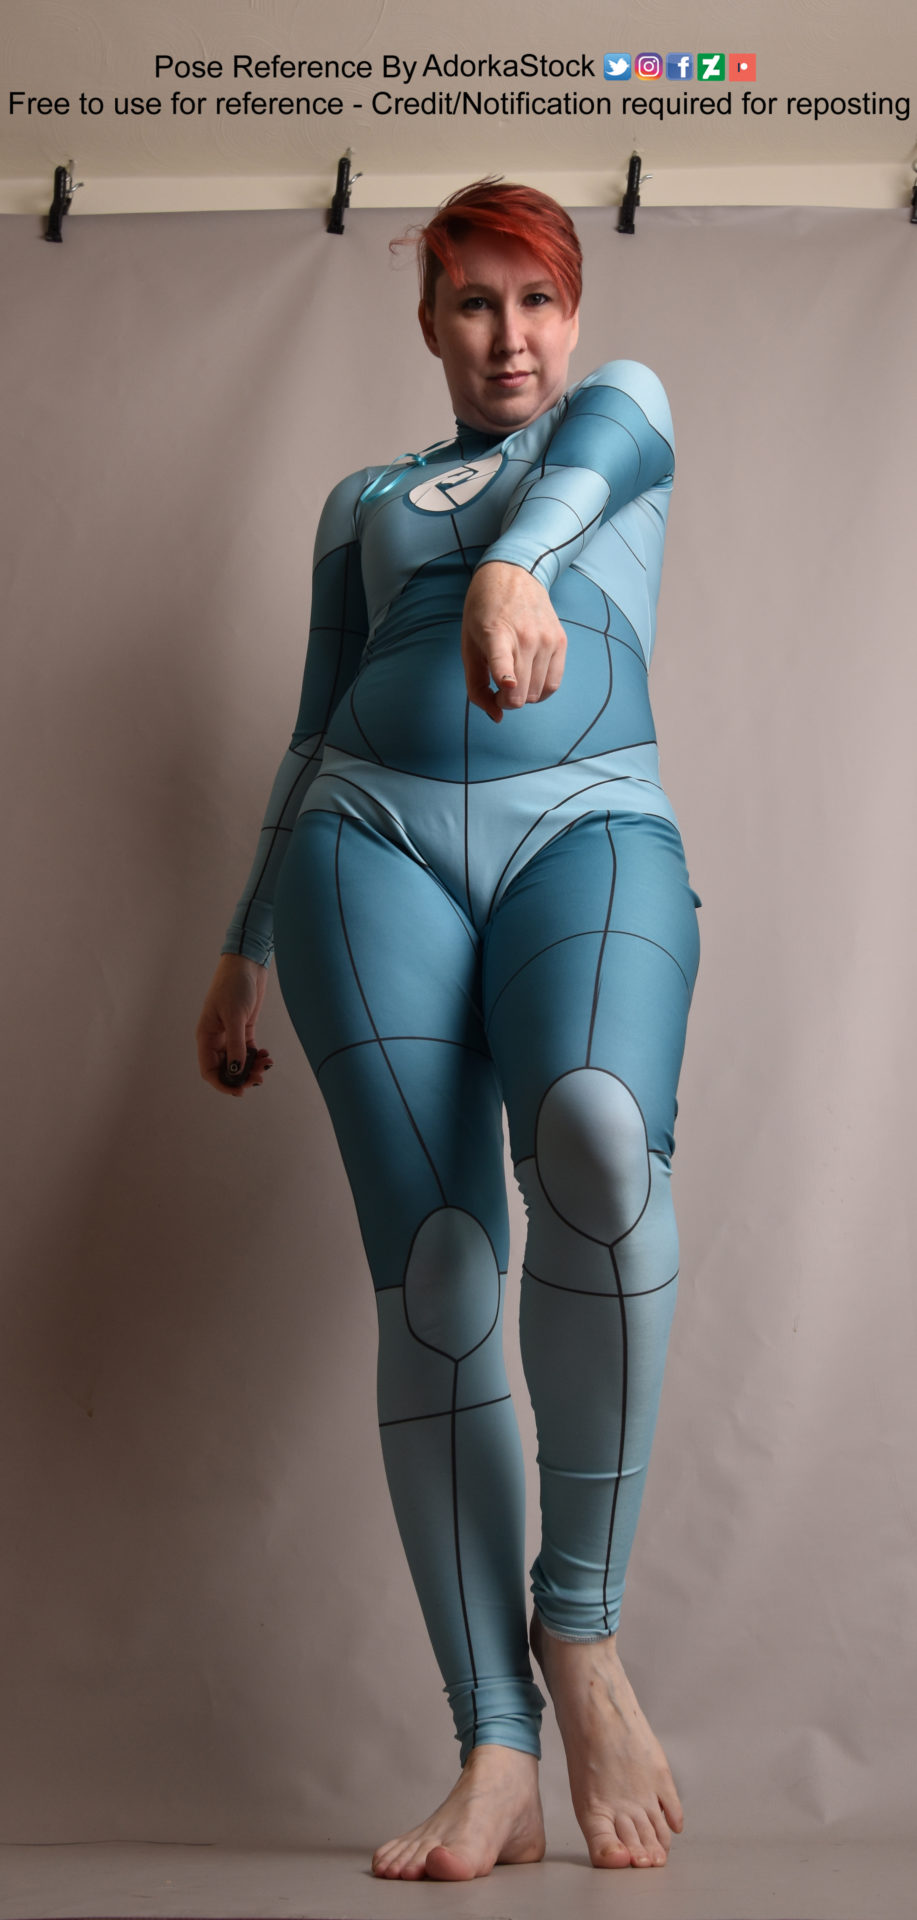 A person wearing an aqua colored body suit with grid lines on it, taken from a low angle, pointing up. The person is facing the camera and pointing their left finger accusingly at the camera.